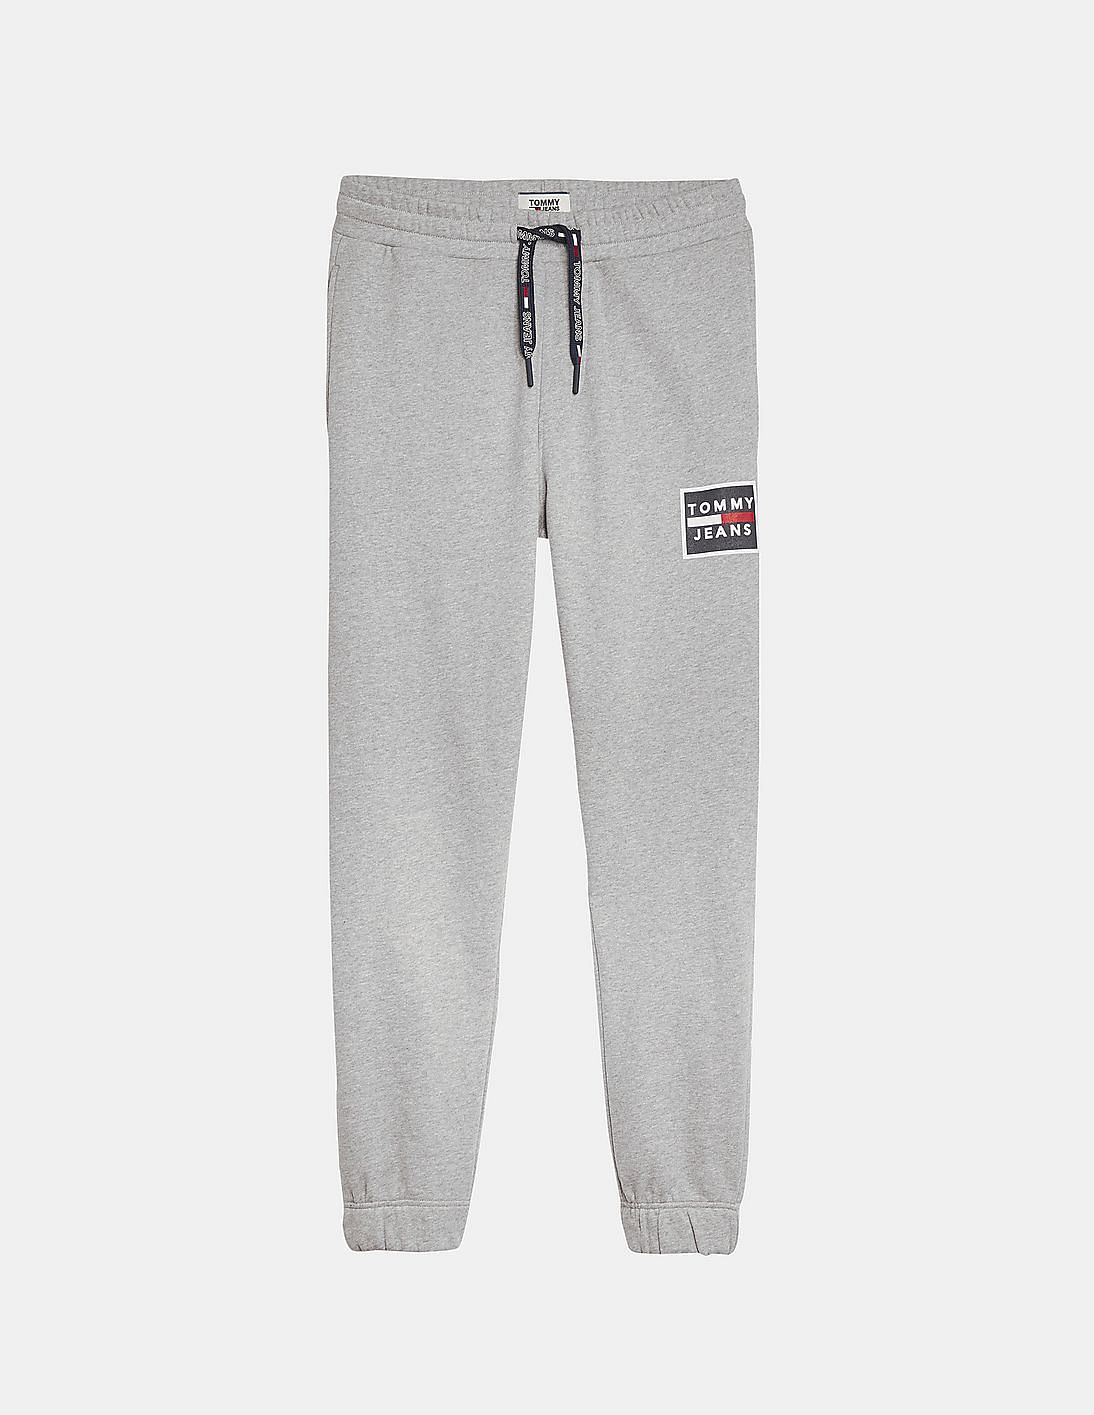 Buy Tommy Hilfiger Men Grey Mid Rise Heathered Joggers - NNNOW.com